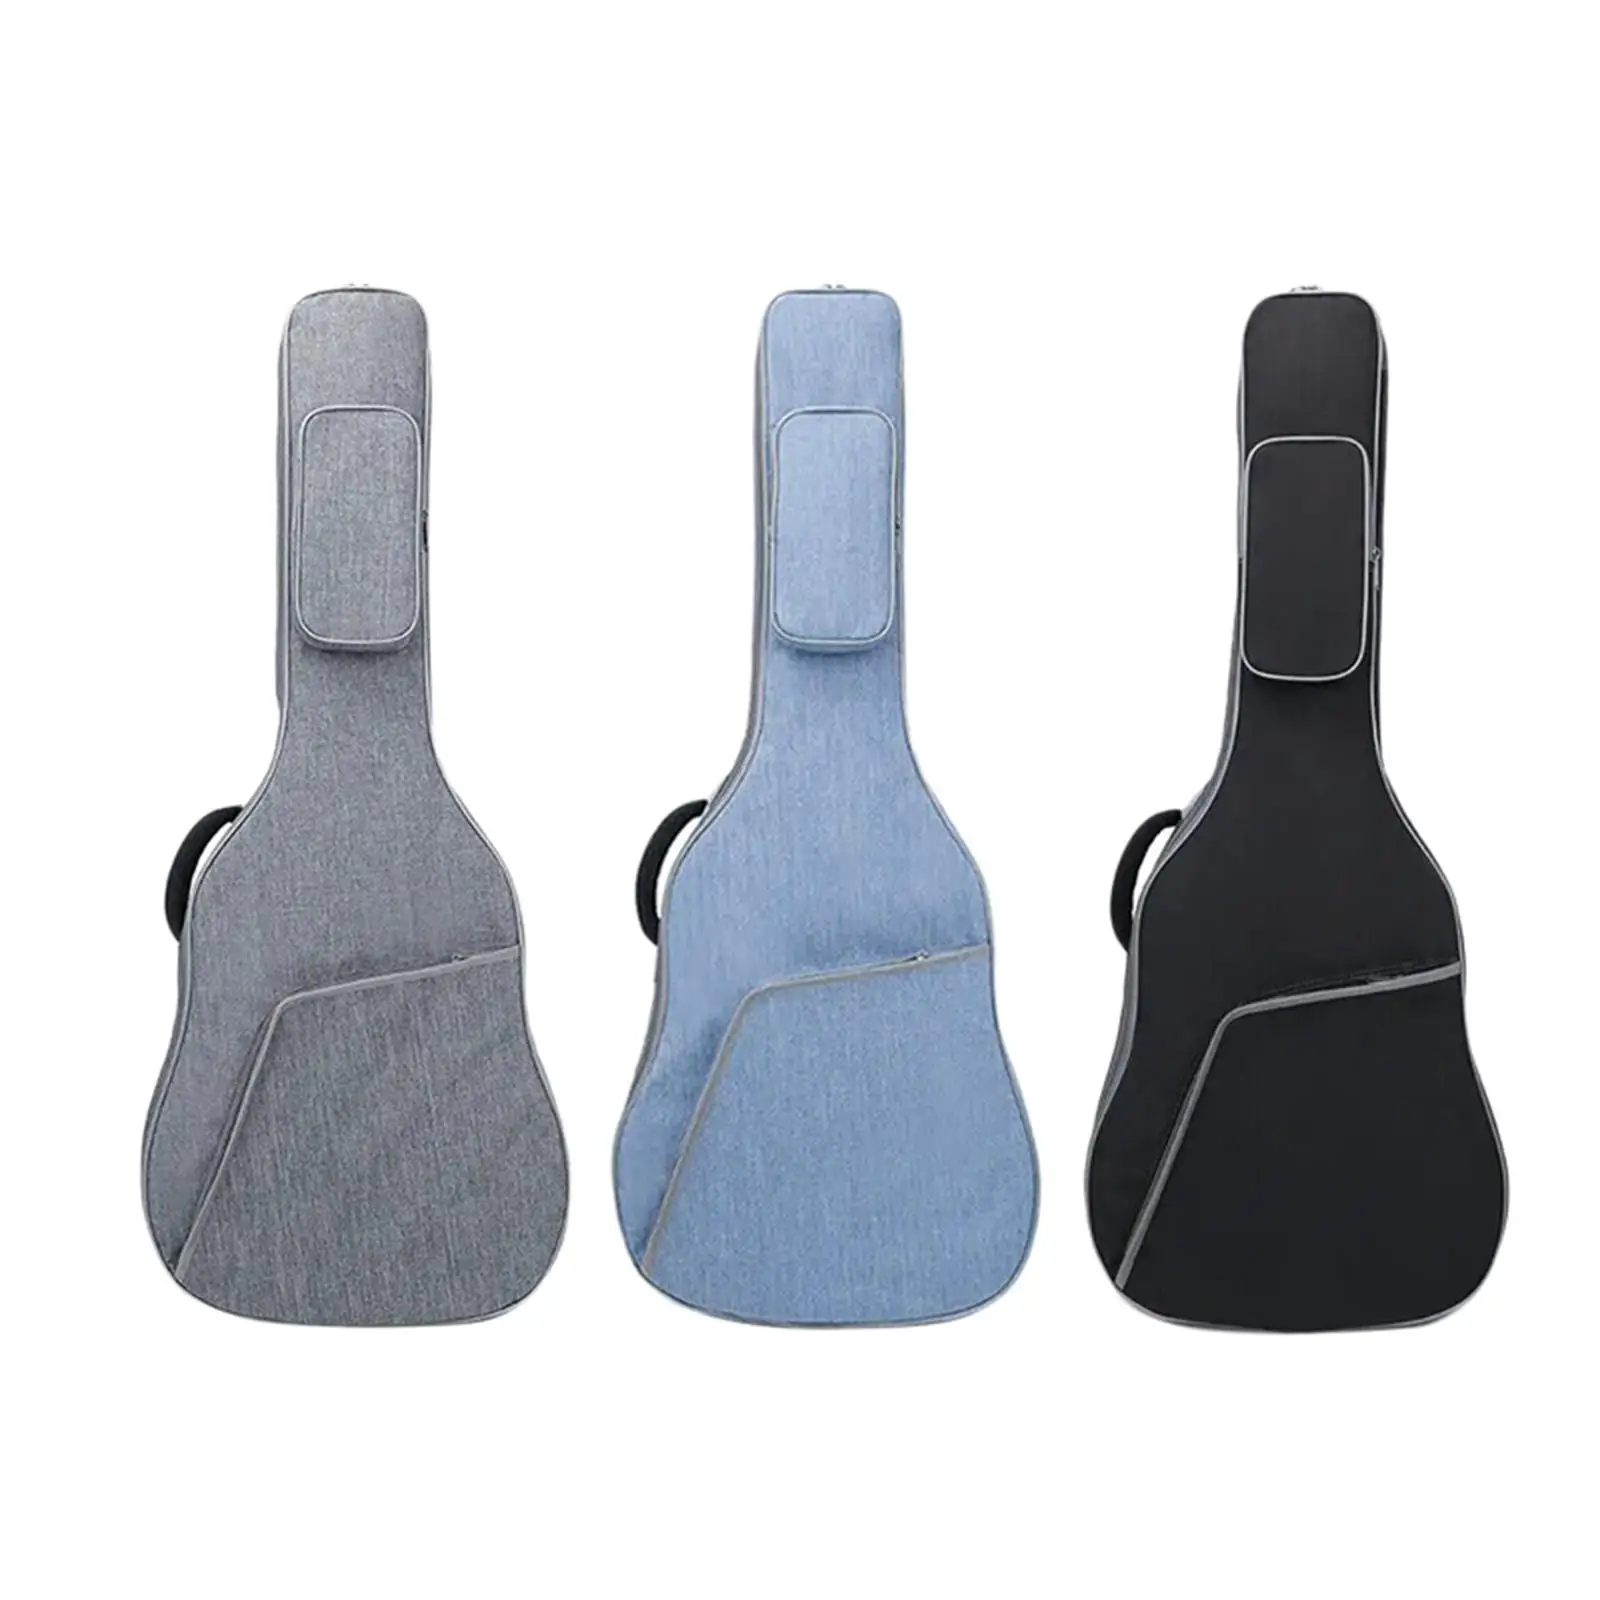 Guitar Case with Carrying Handle Waterproof 41in Guitar Dust Cover Bag for Electric Guitars Concert Travel Acoustic Guitars